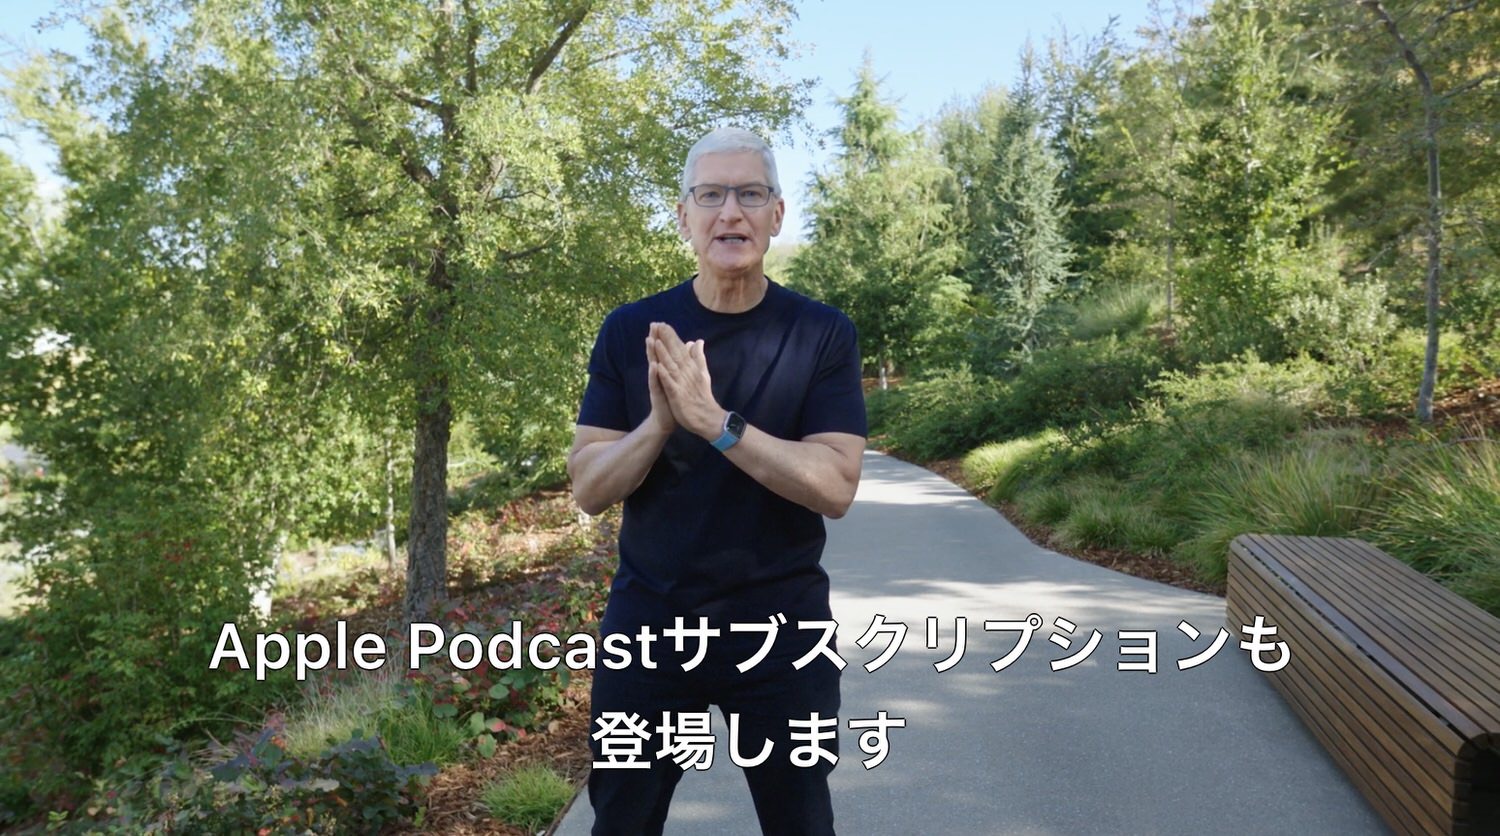 Apple podcast subsc 02 04